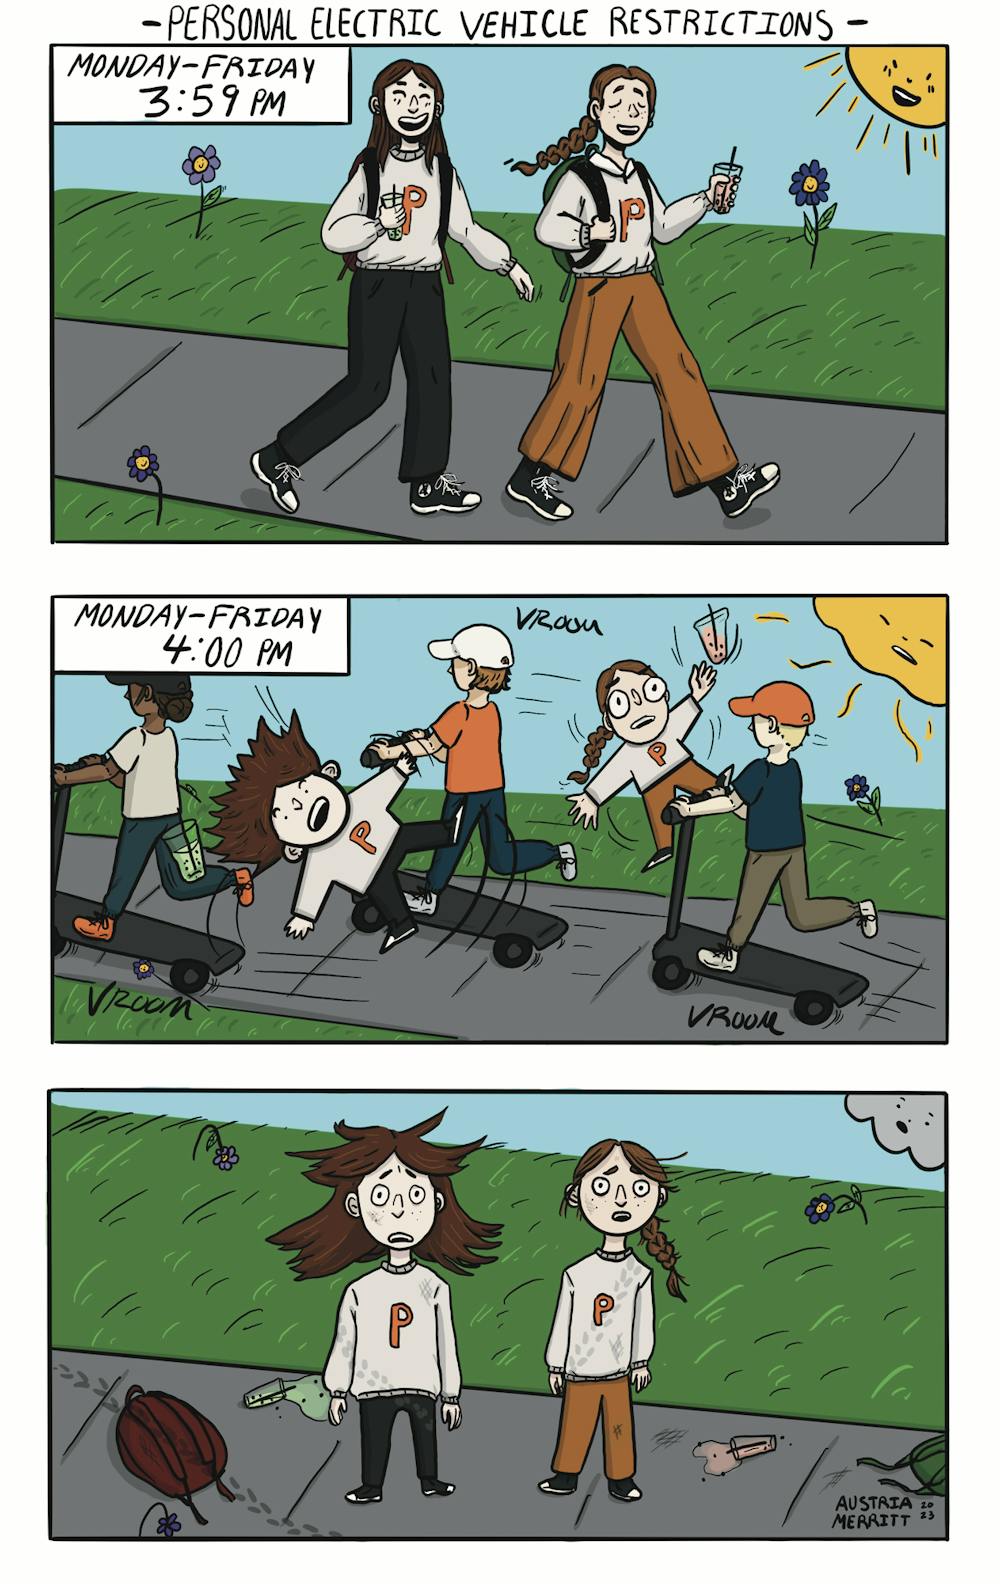 Panel 1: "Monday through Friday 3:59pm". Two friends walk down the sidewalk laughing with boba. The sun is shining. Panel 2: "Monday through Friday 4:00pm" Three students on scooters zoom by knocking the two friends into the air. Boba is flying. Panel 3: The two friends stand with shocked expressions. Their boba is spilled on the ground and they are covered in tire tracks. The end.